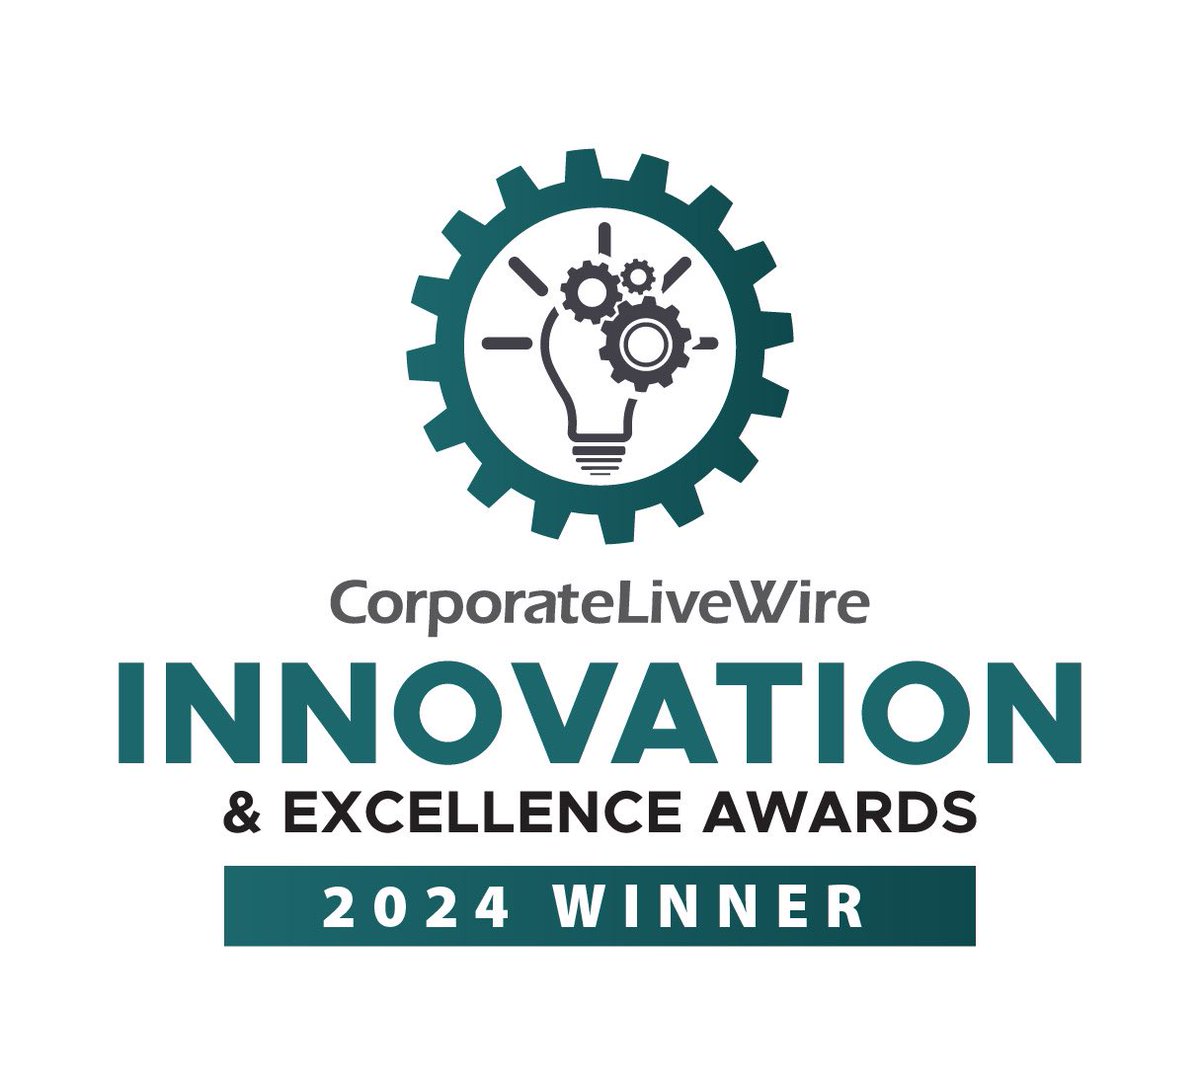 Stone Mountain Capital is delighted to be awarded ‘Investment Banking Firm of the Year’ @CorpLiveWire #Innovation & Excellence Awards 2024🏆 @stonemountainuk @stonemountaincp @stonemountainch @stonemountainae @stonemountaincv #venturecapital #fintech #btc stonemountain-capital.net/news/stone-mou…